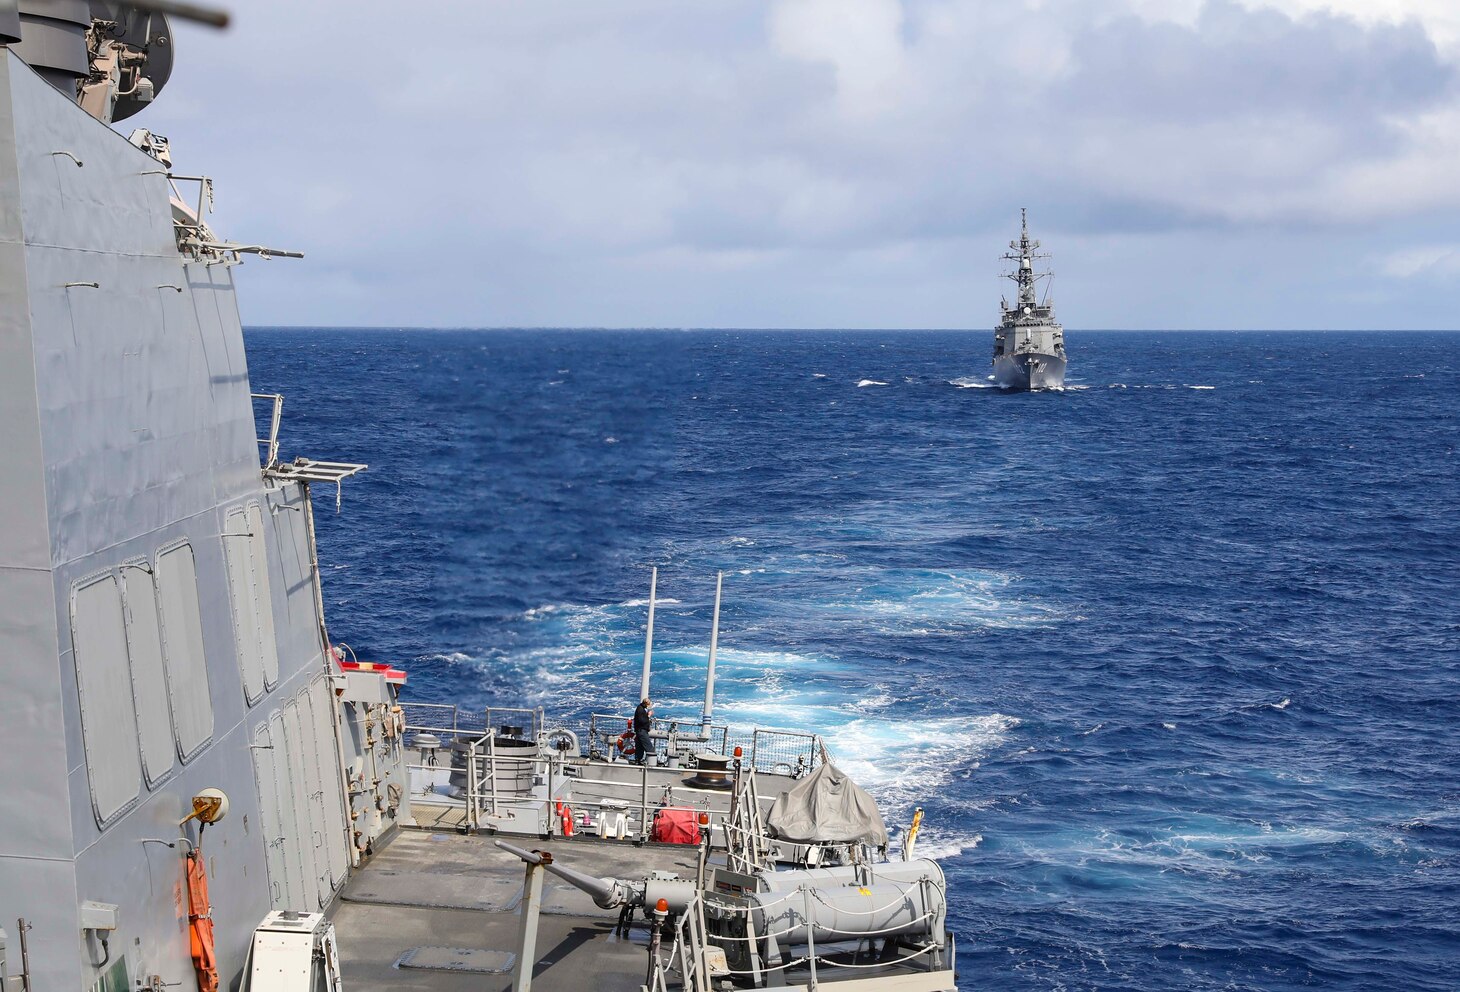 The Arleigh Burke-class guided-missile destroyer USS Benfold (DDG 65) sails in formation with the Japan Maritime Self-Defense Force missile destroyer JS Harusame (DD 102) during the annual U.S.-Japan Bilateral Advanced Warfighting Training Exercise.